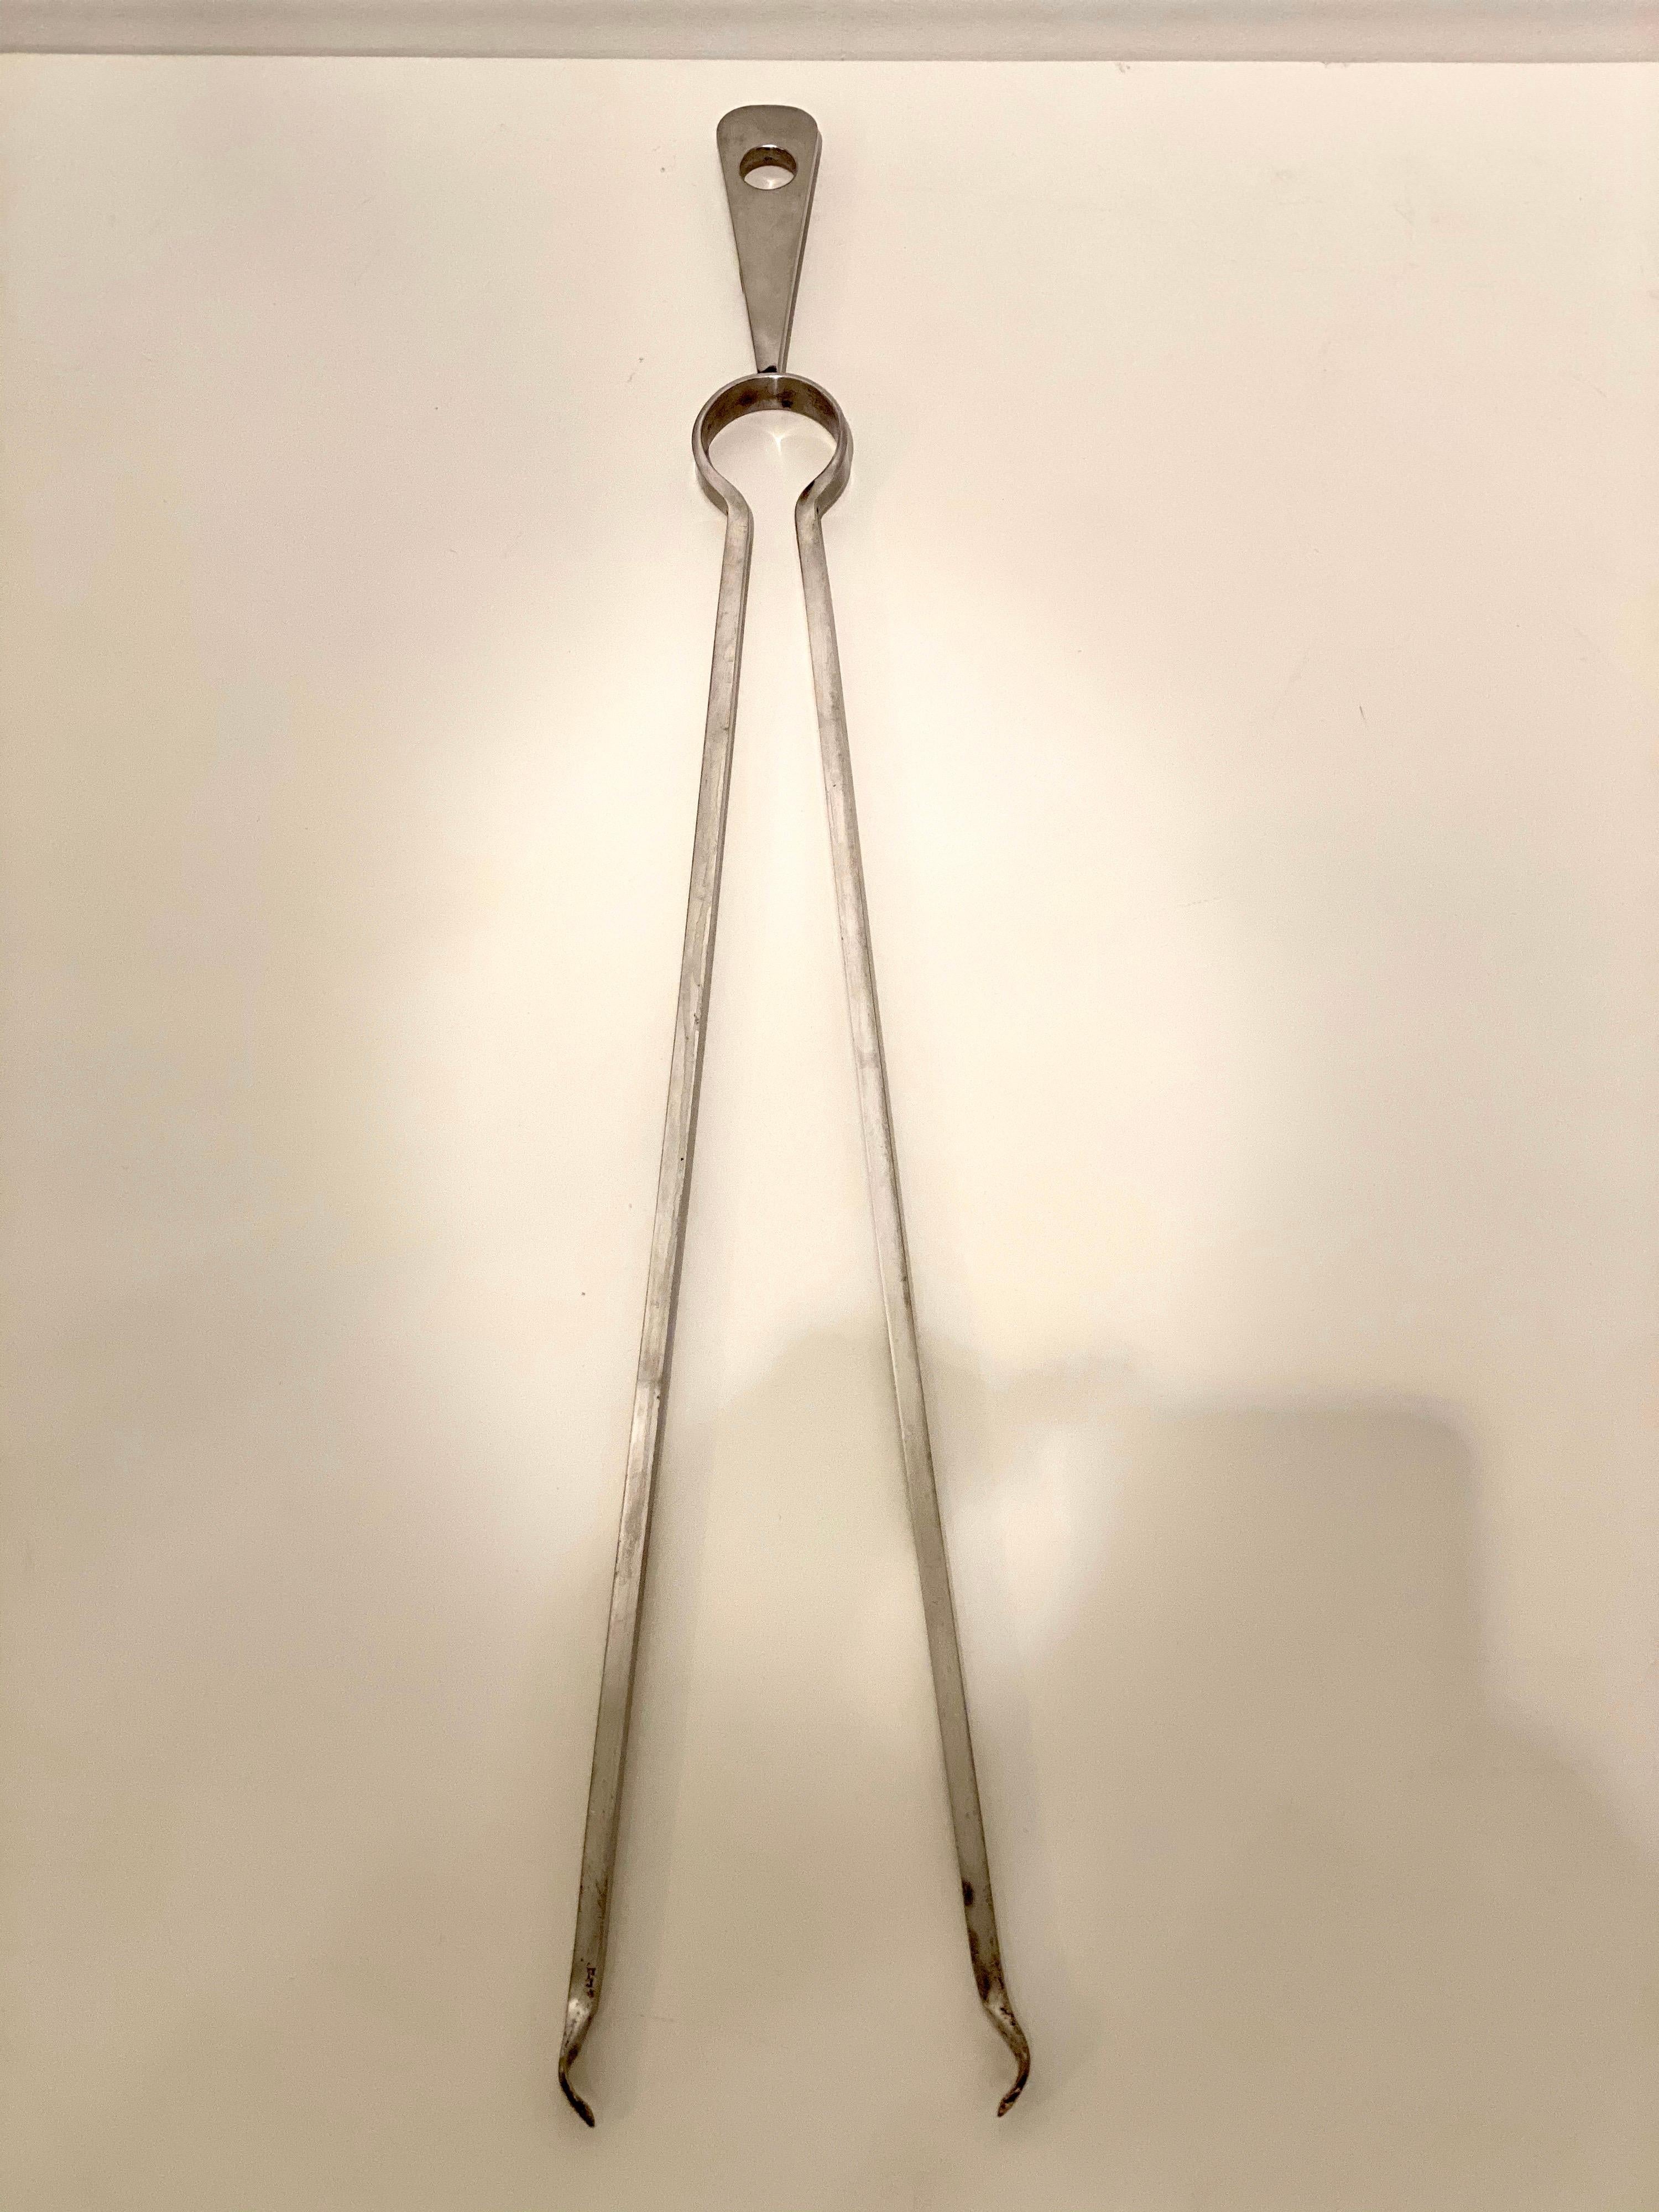 Stainless Steel Jacques Charles Fireplace Tools, 1970s